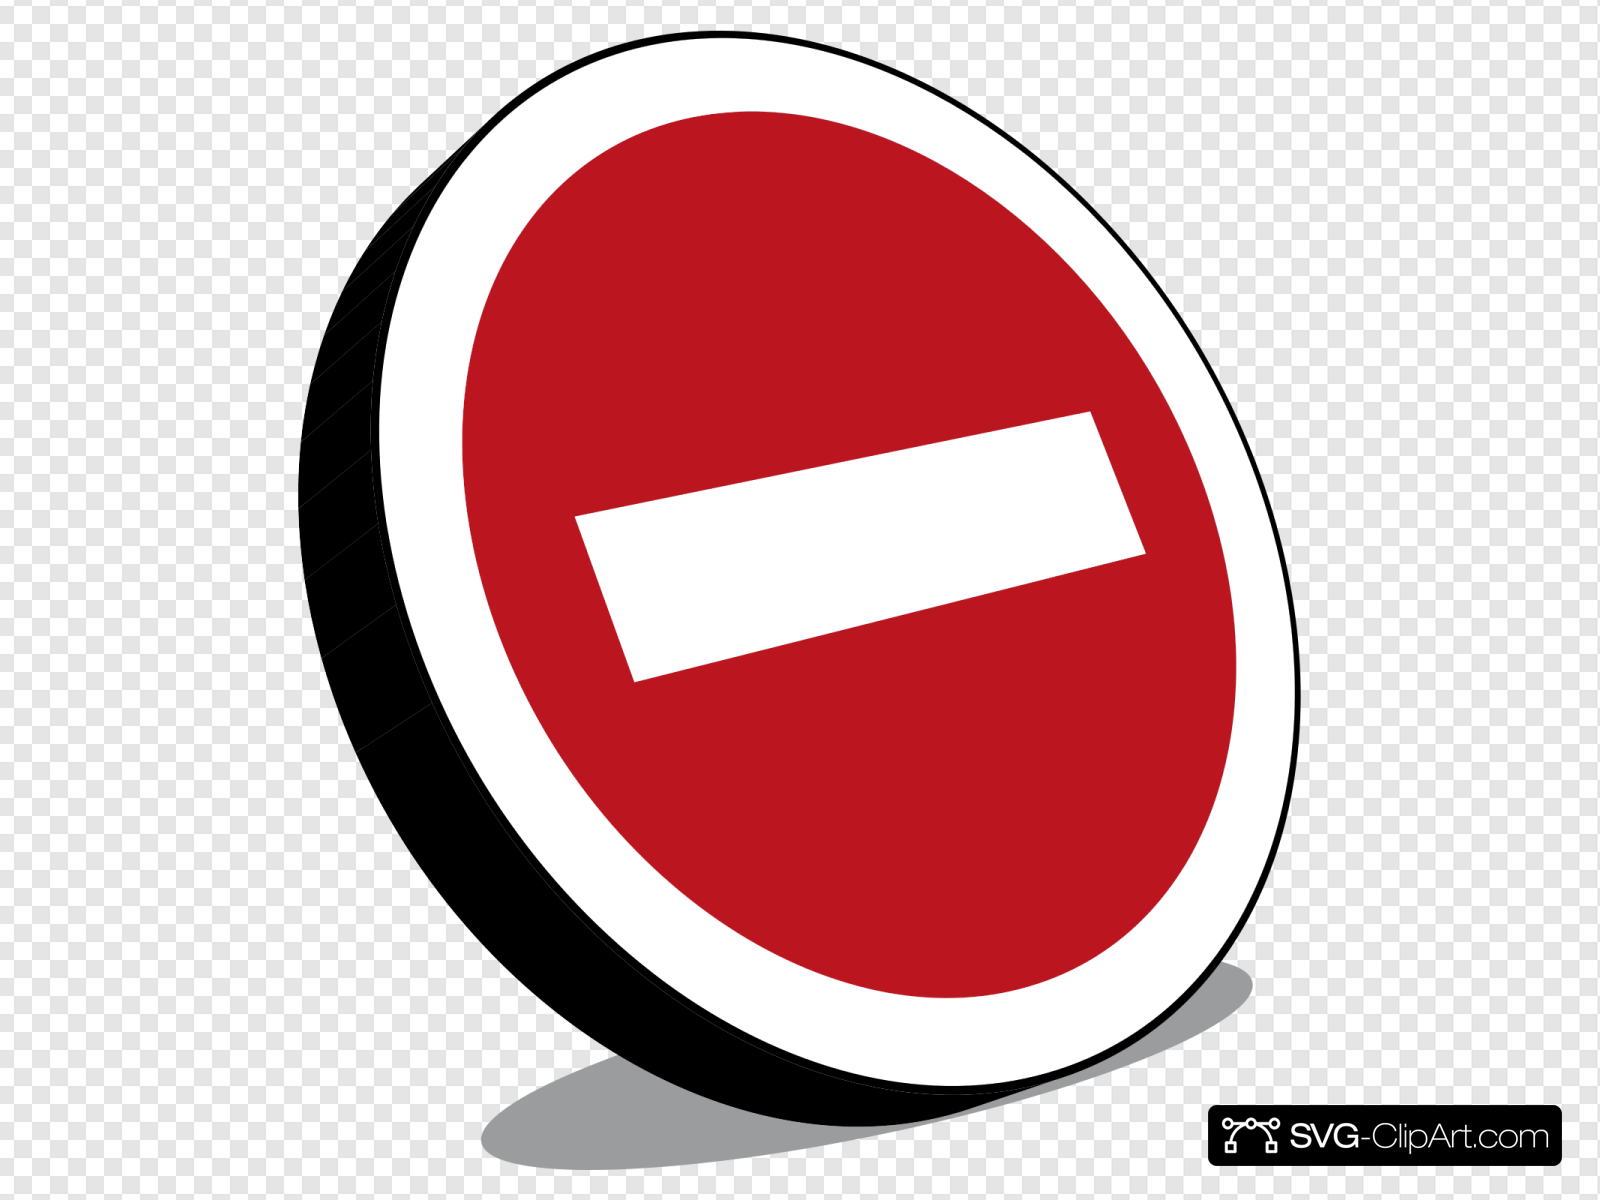 No Entry Sign Clip art, Icon and SVG.